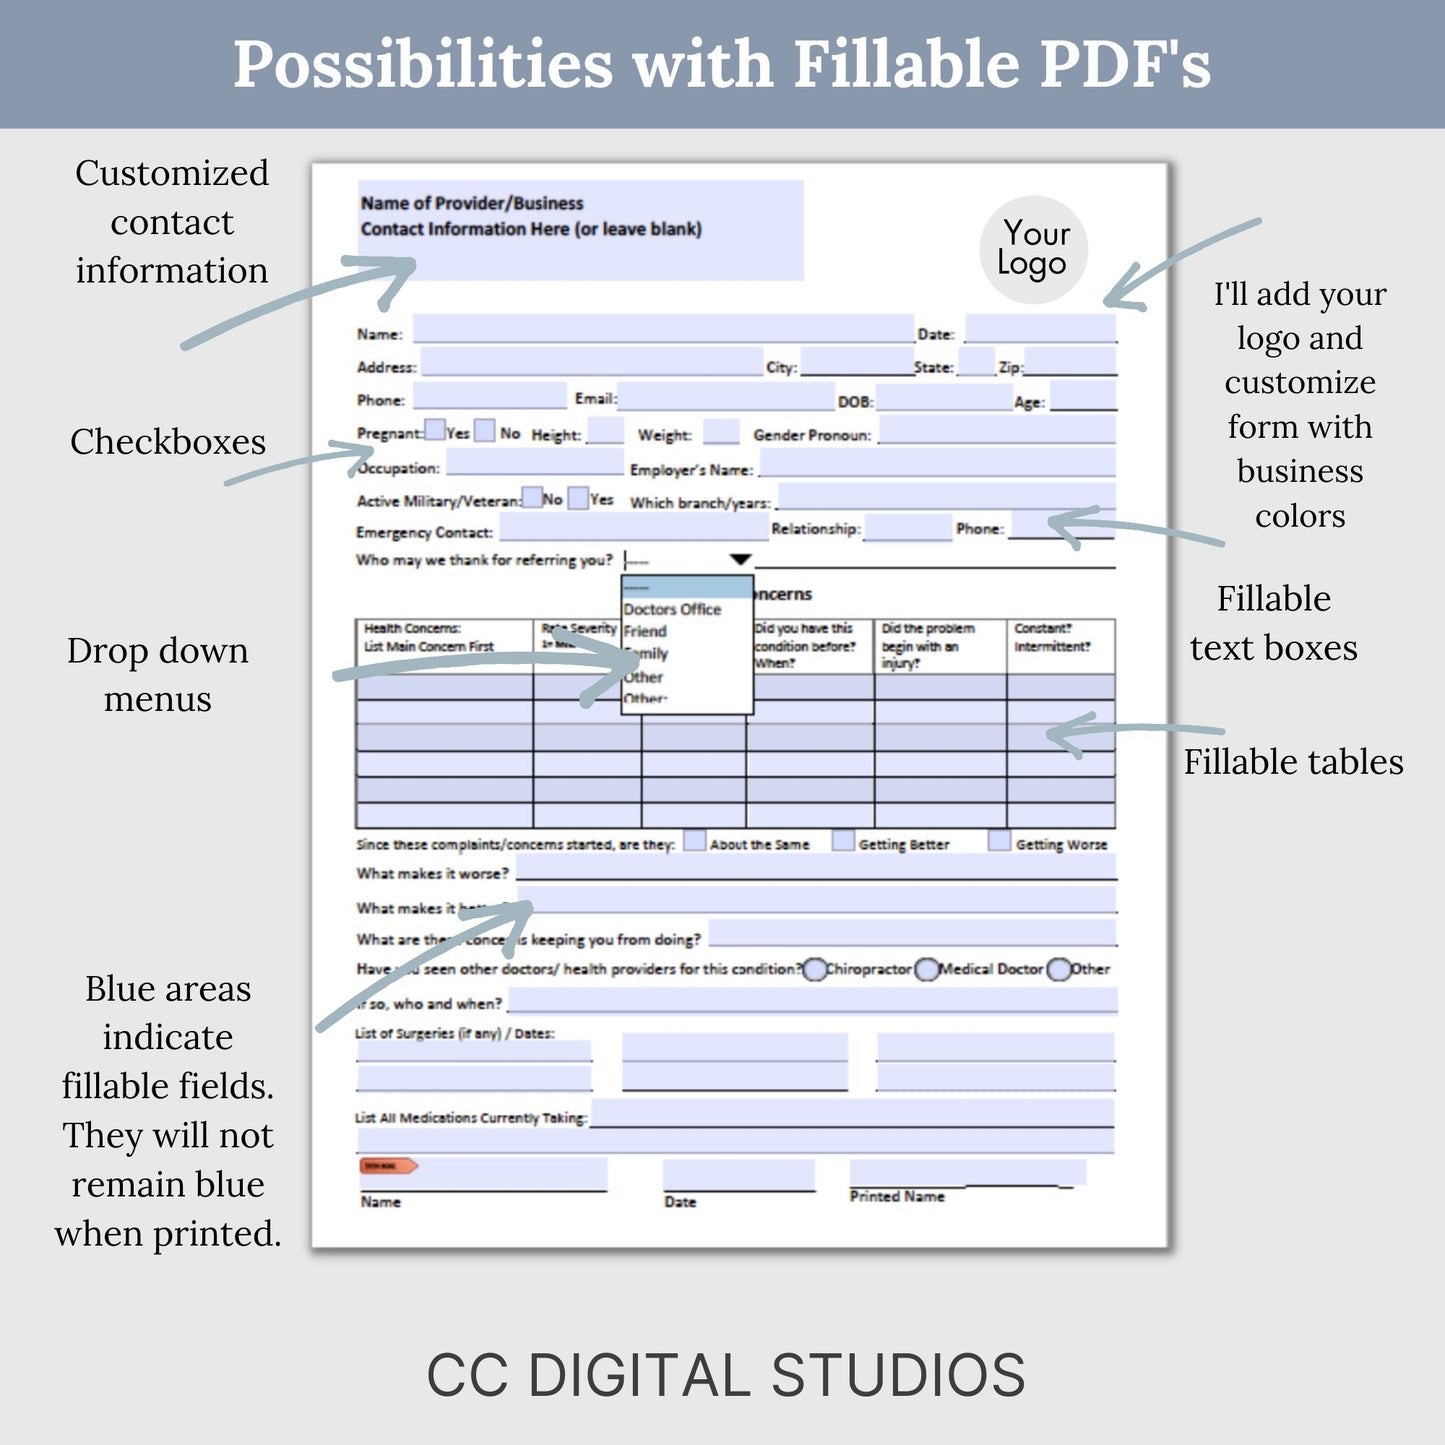 Basic PDF Design Package. Elevate your documents with professional design, edits, and revisions for up to 3 pages. Streamline your paperwork with fillable PDFs